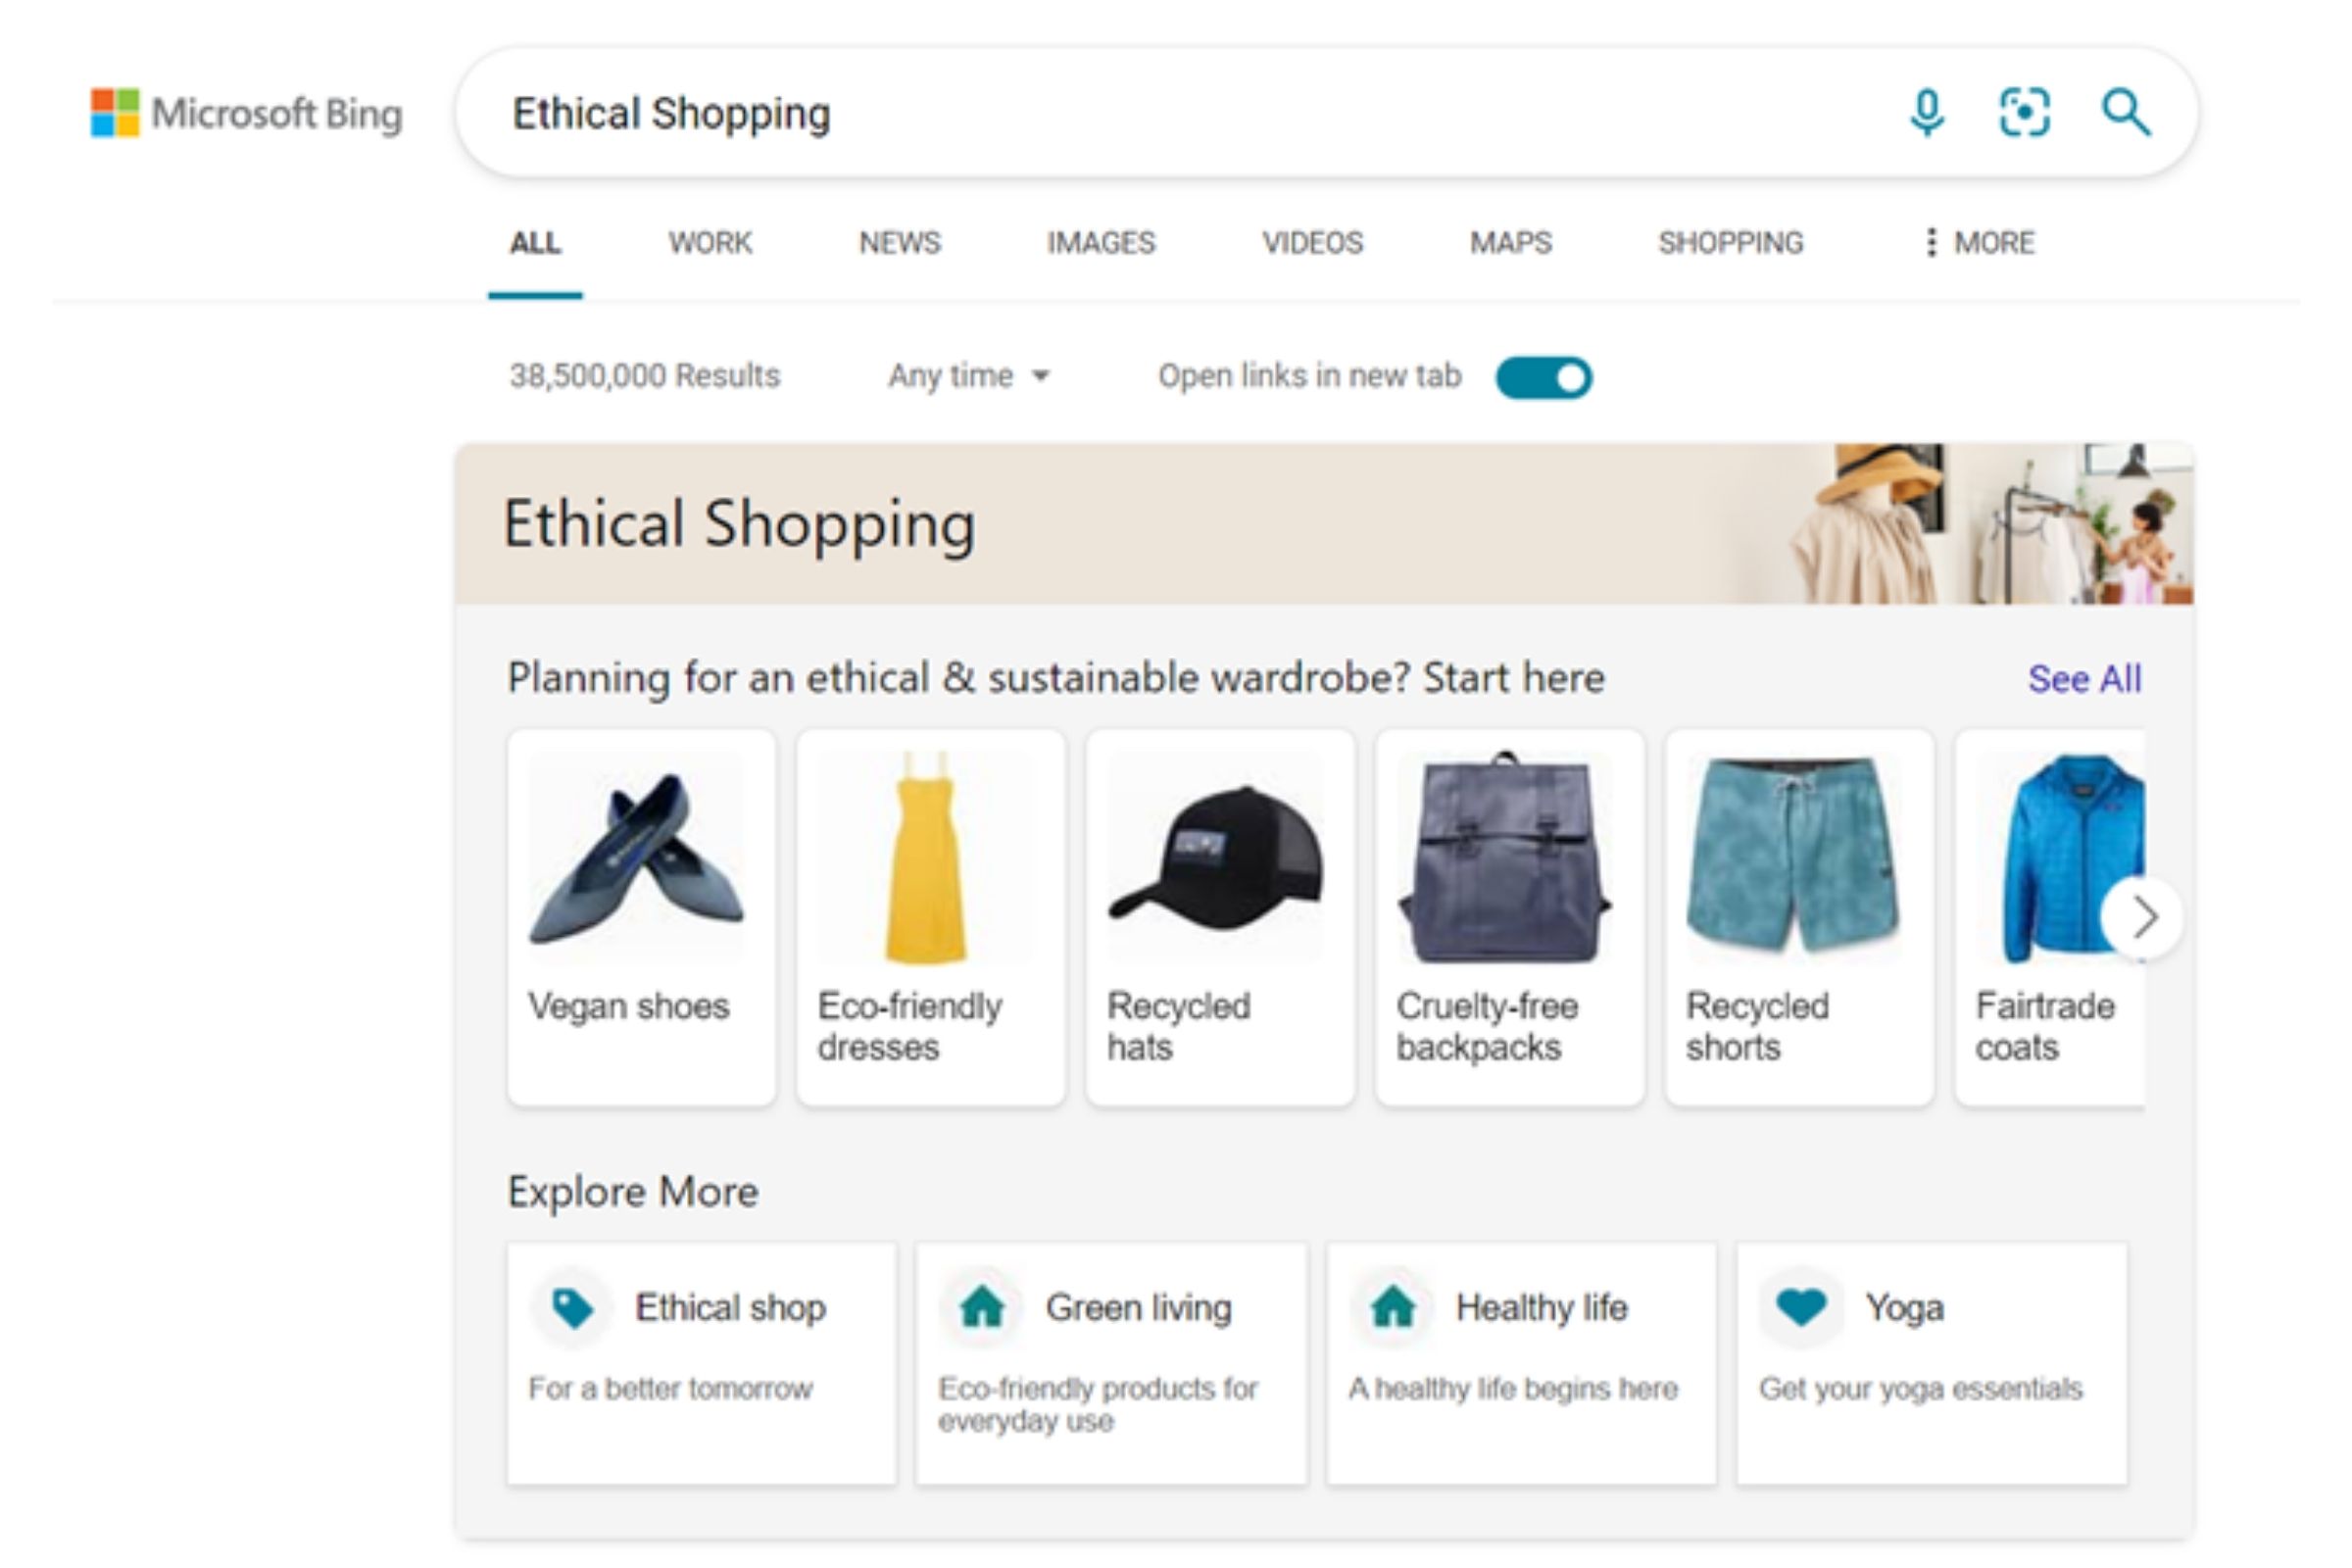 Bing Ethical Shopping update